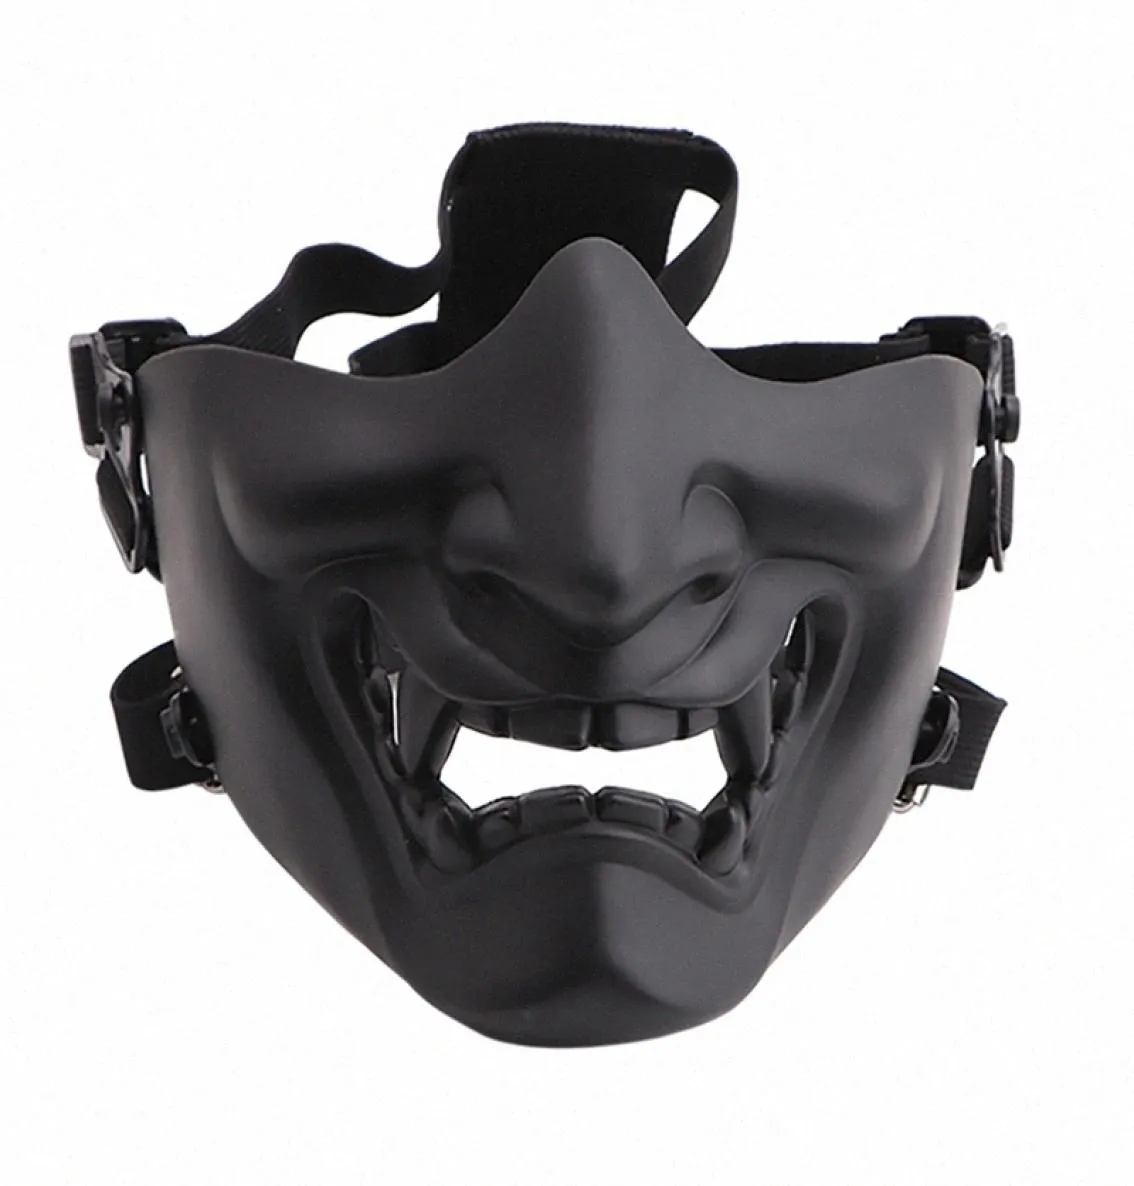 Scary Smiling Ghost Half Face Mask Shape Adjustable Tactical Headwear Protection Halloween Costumes Accessories aVAe7842236